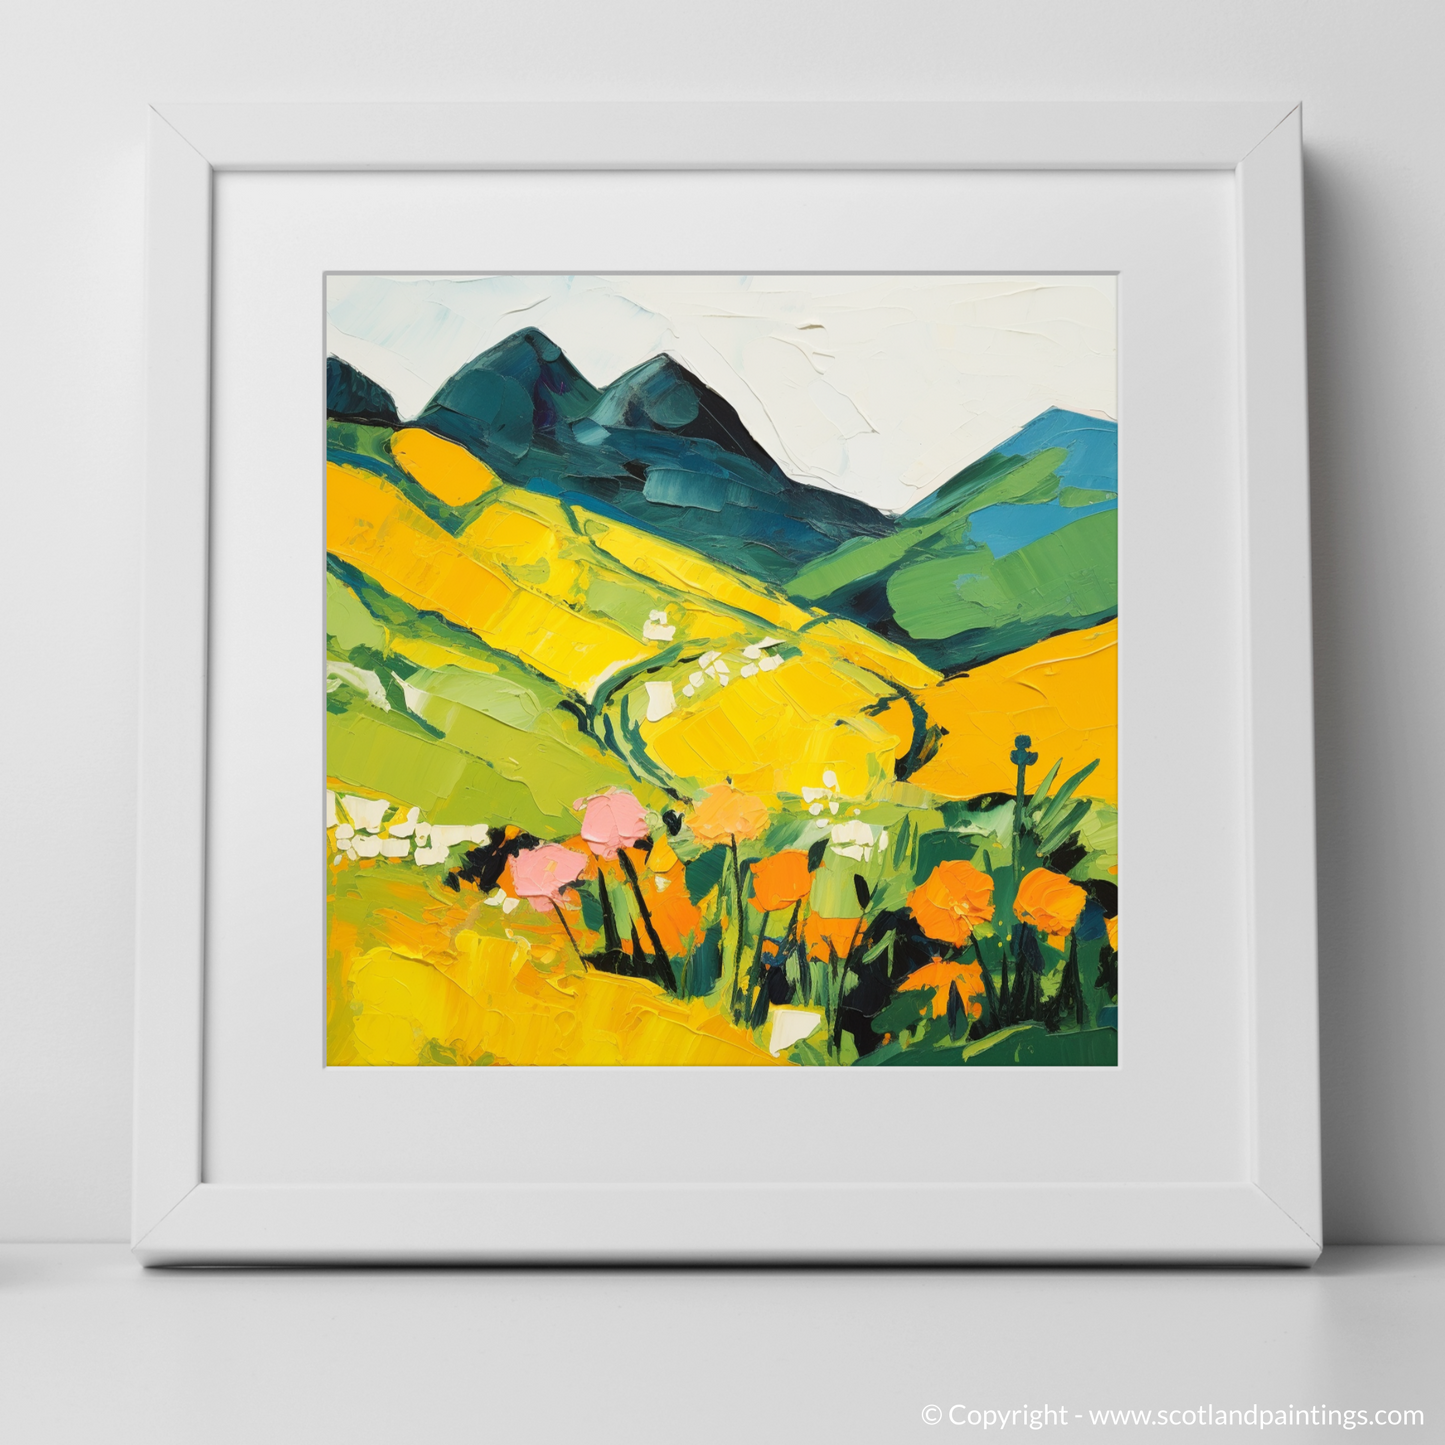 Alpine Lady's-Mantle in Abstract: A Scottish Highlands Tapestry